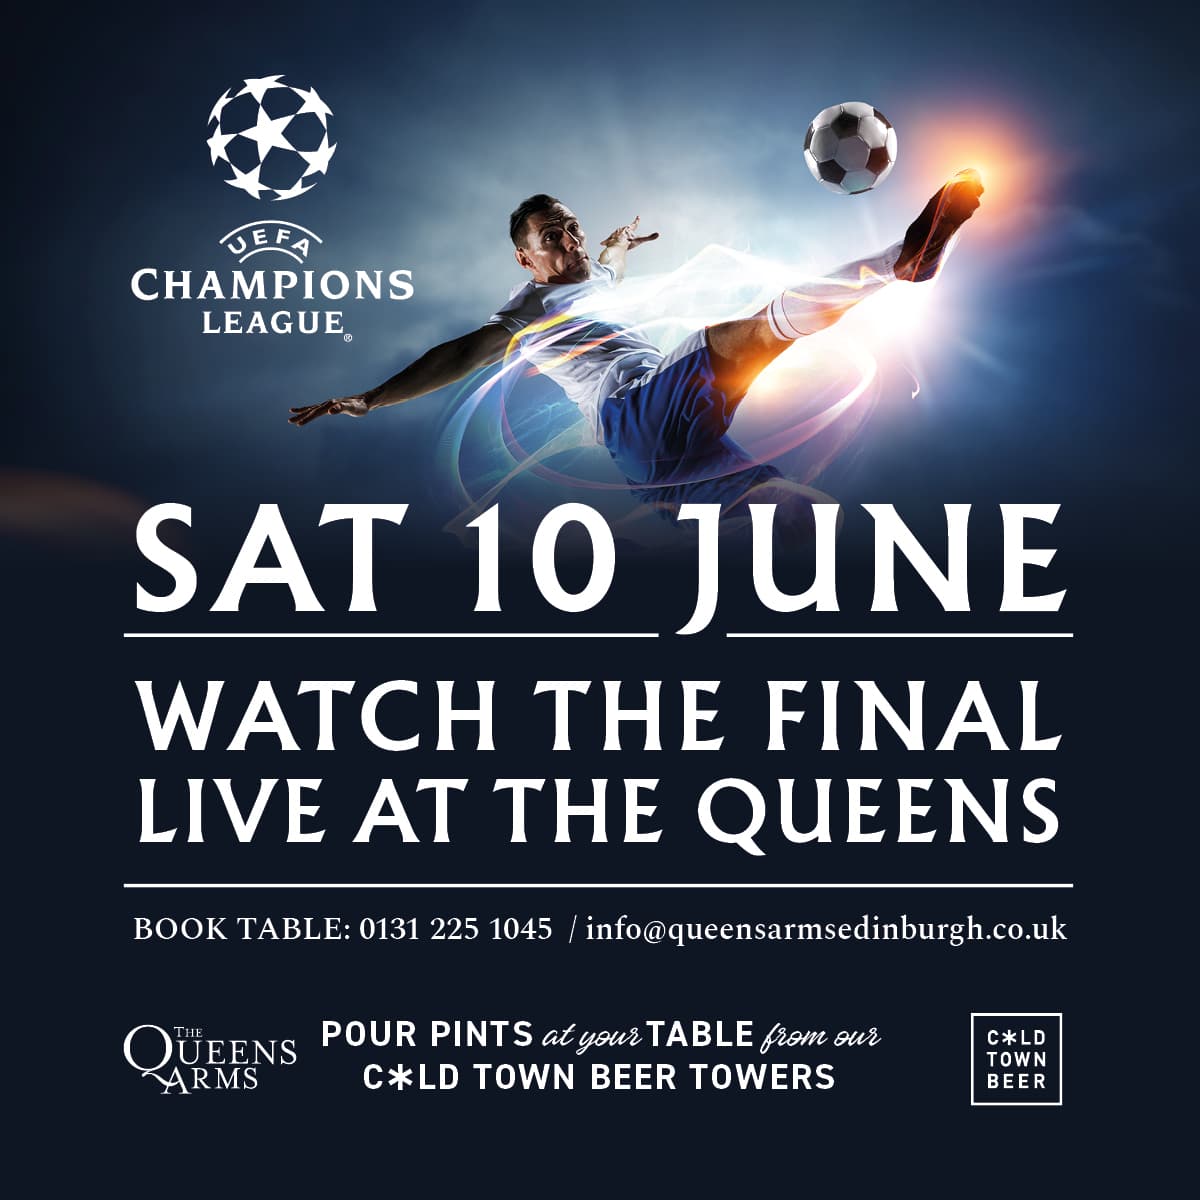 Watch the Champions League Final at The Queens Arms